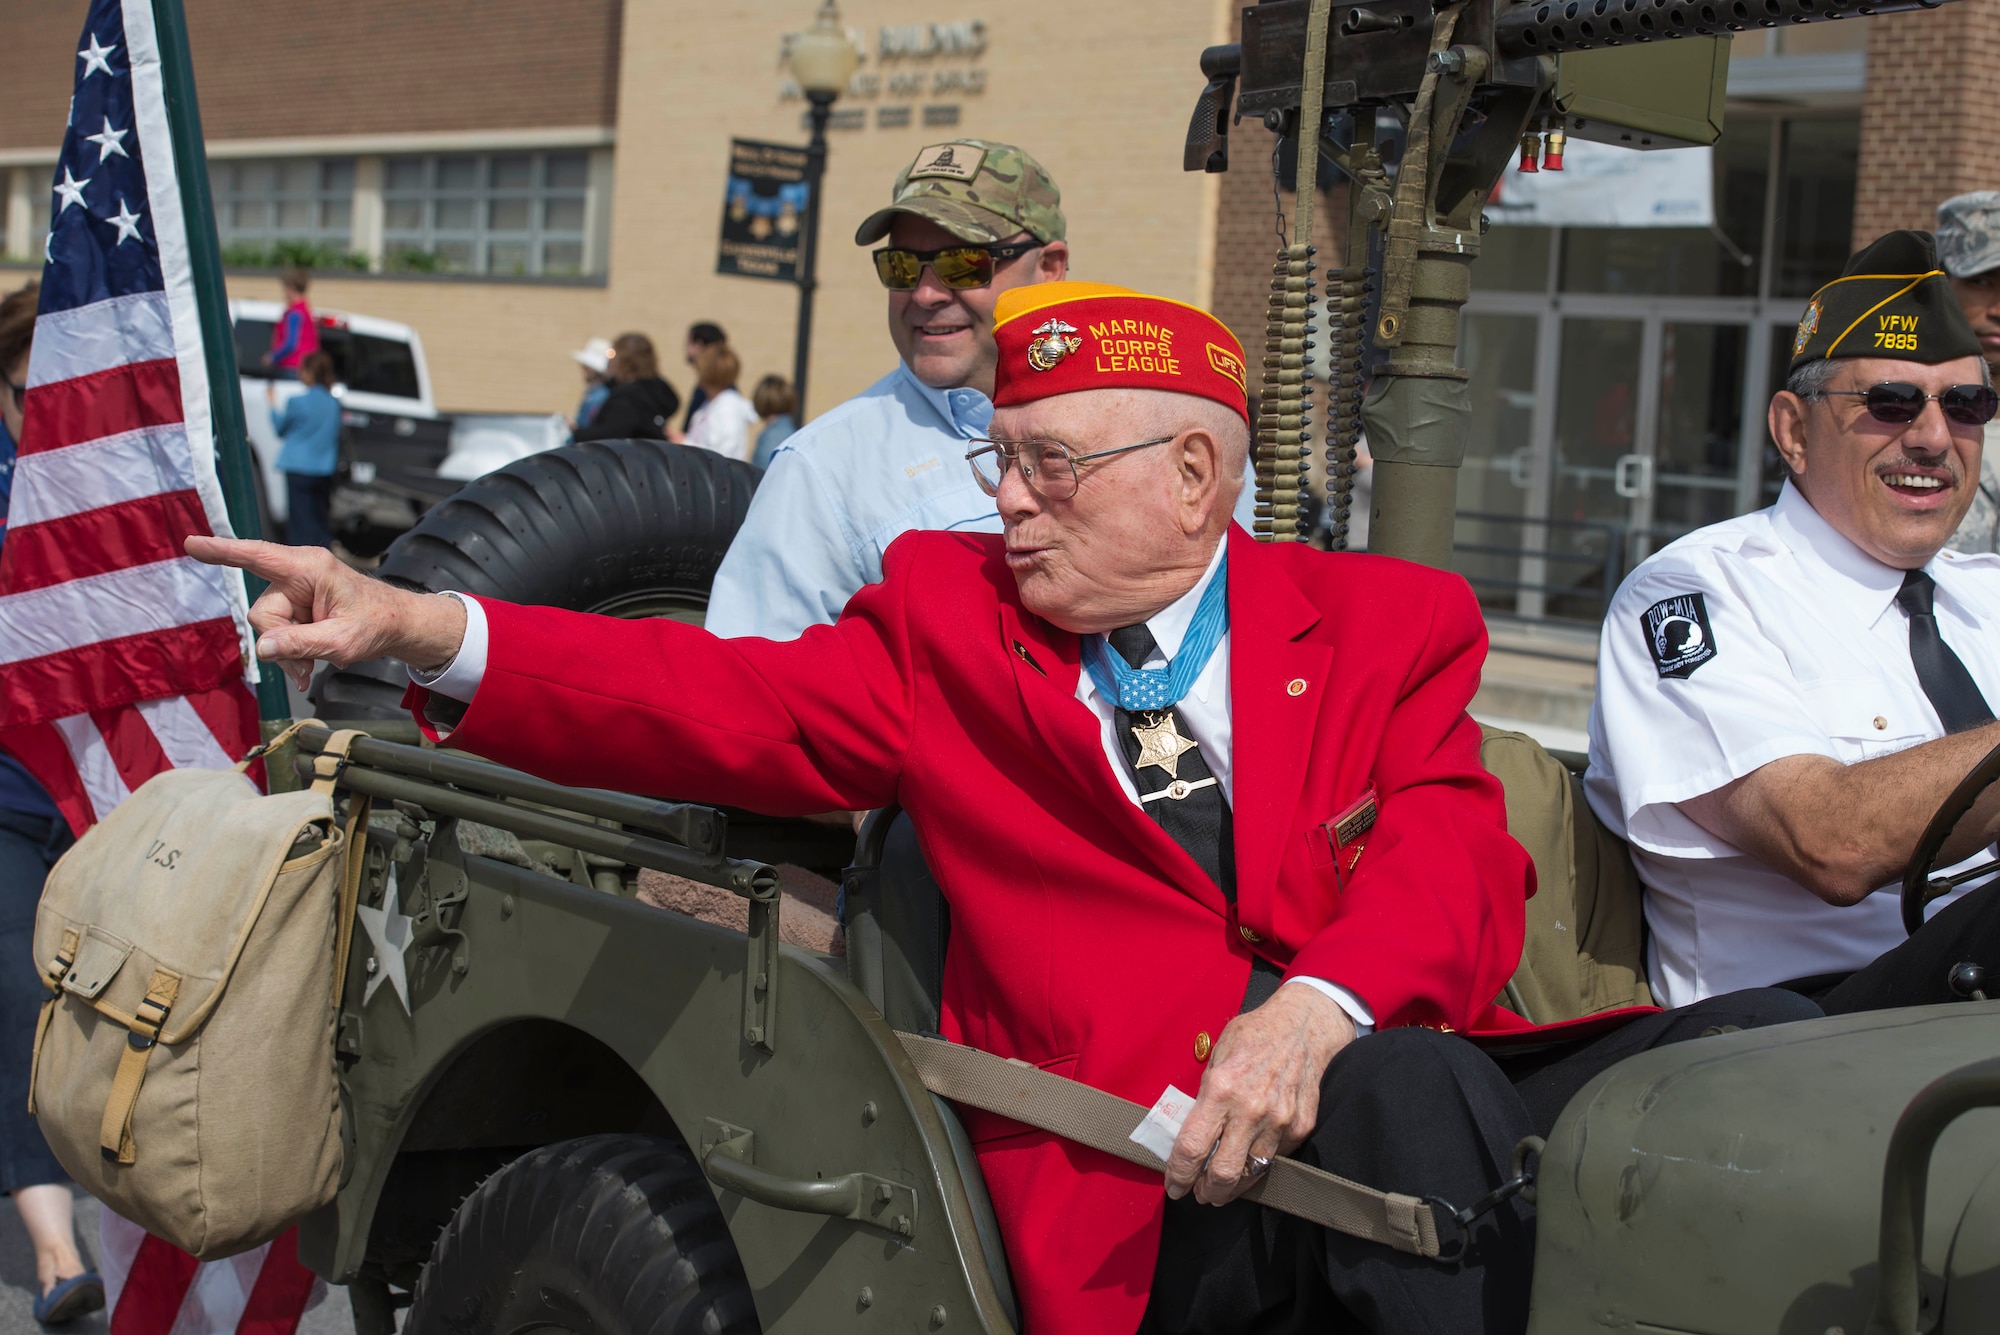 Hershel “Woody” Williams greets people from Gainesville, Texas, during the Medal of Honor Parade, April 11, 2015. Gainesville was said to be the most patriotic city in America in 2012, according to a KXII news article. Gainesville is also the Medal of Honor host city that was established in 2001. (U.S. Air Force photo by Senior Airman Kyle Gese/Released)

